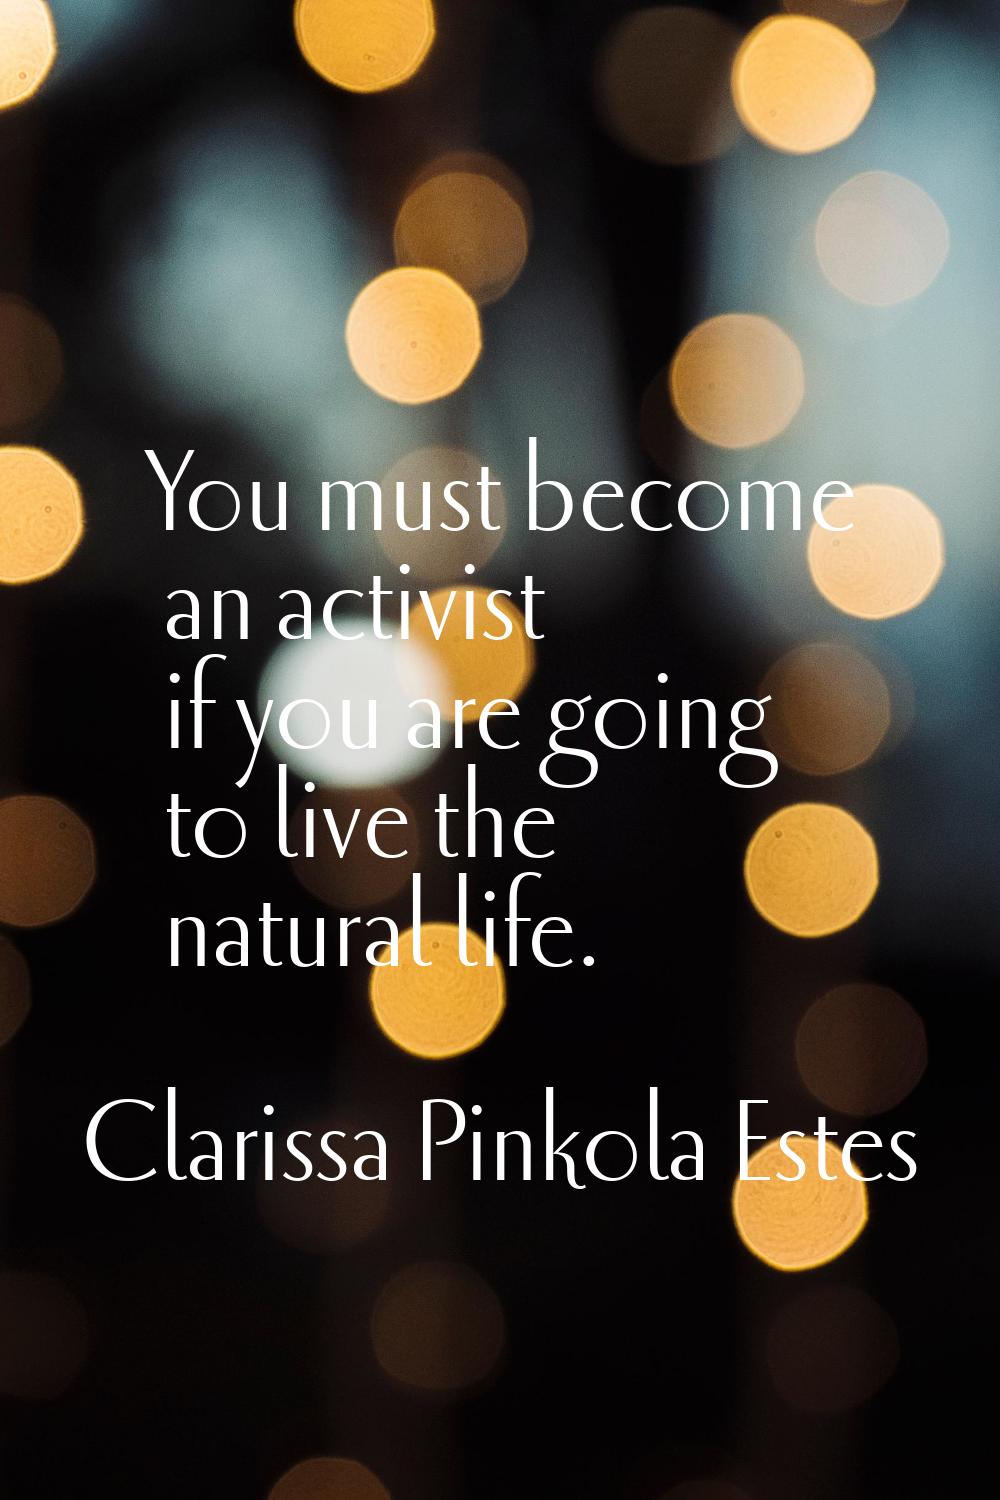 You must become an activist if you are going to live the natural life.